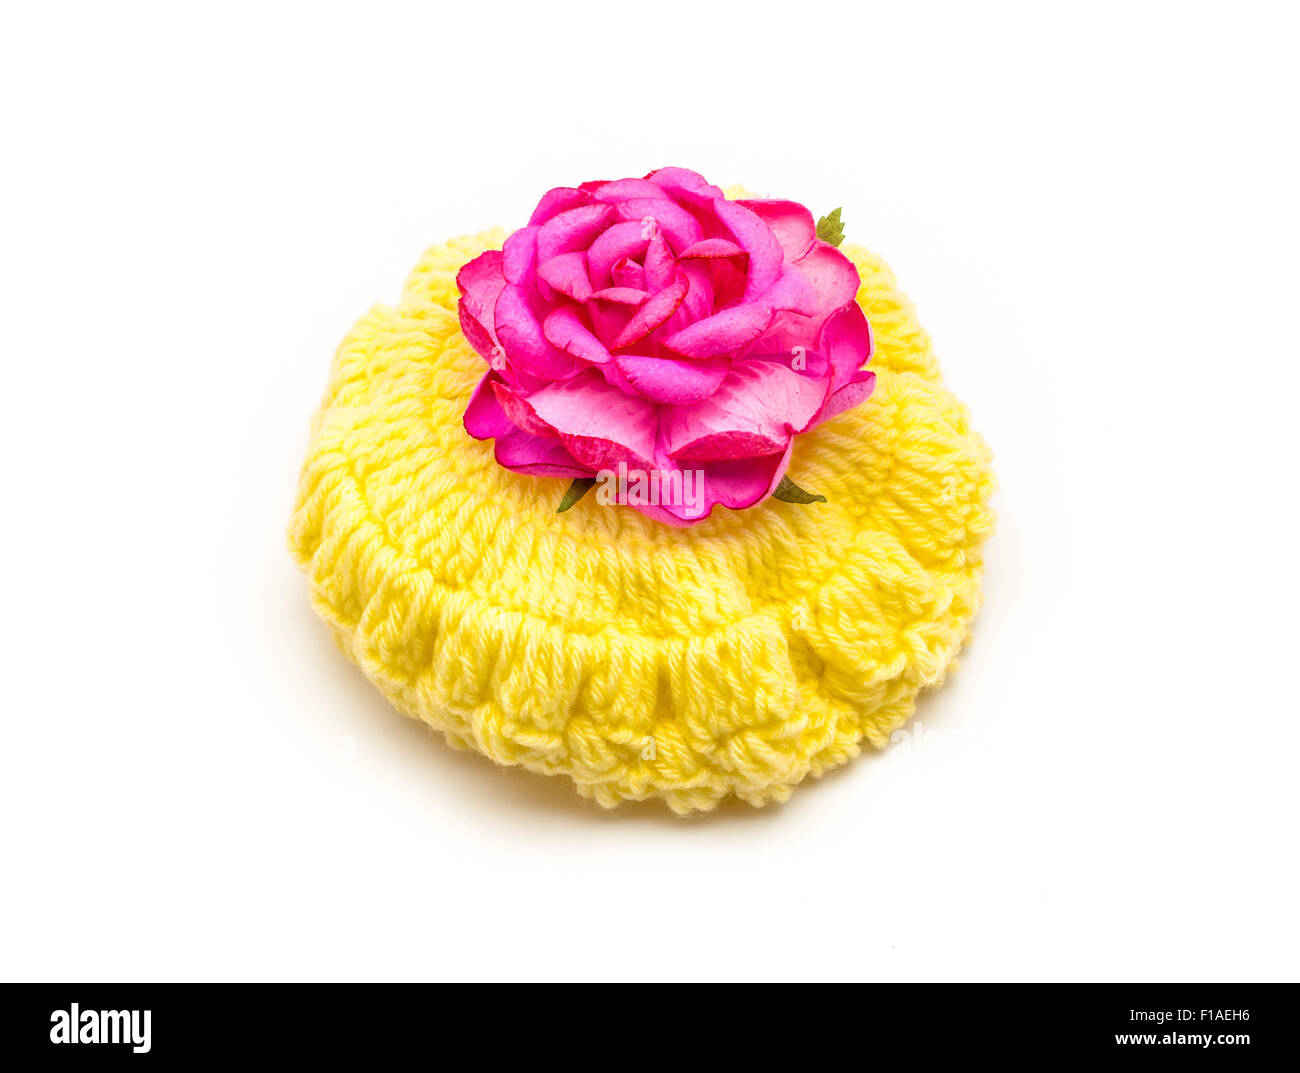 Yellow Wool hat with Pink Rose. Stock Photo